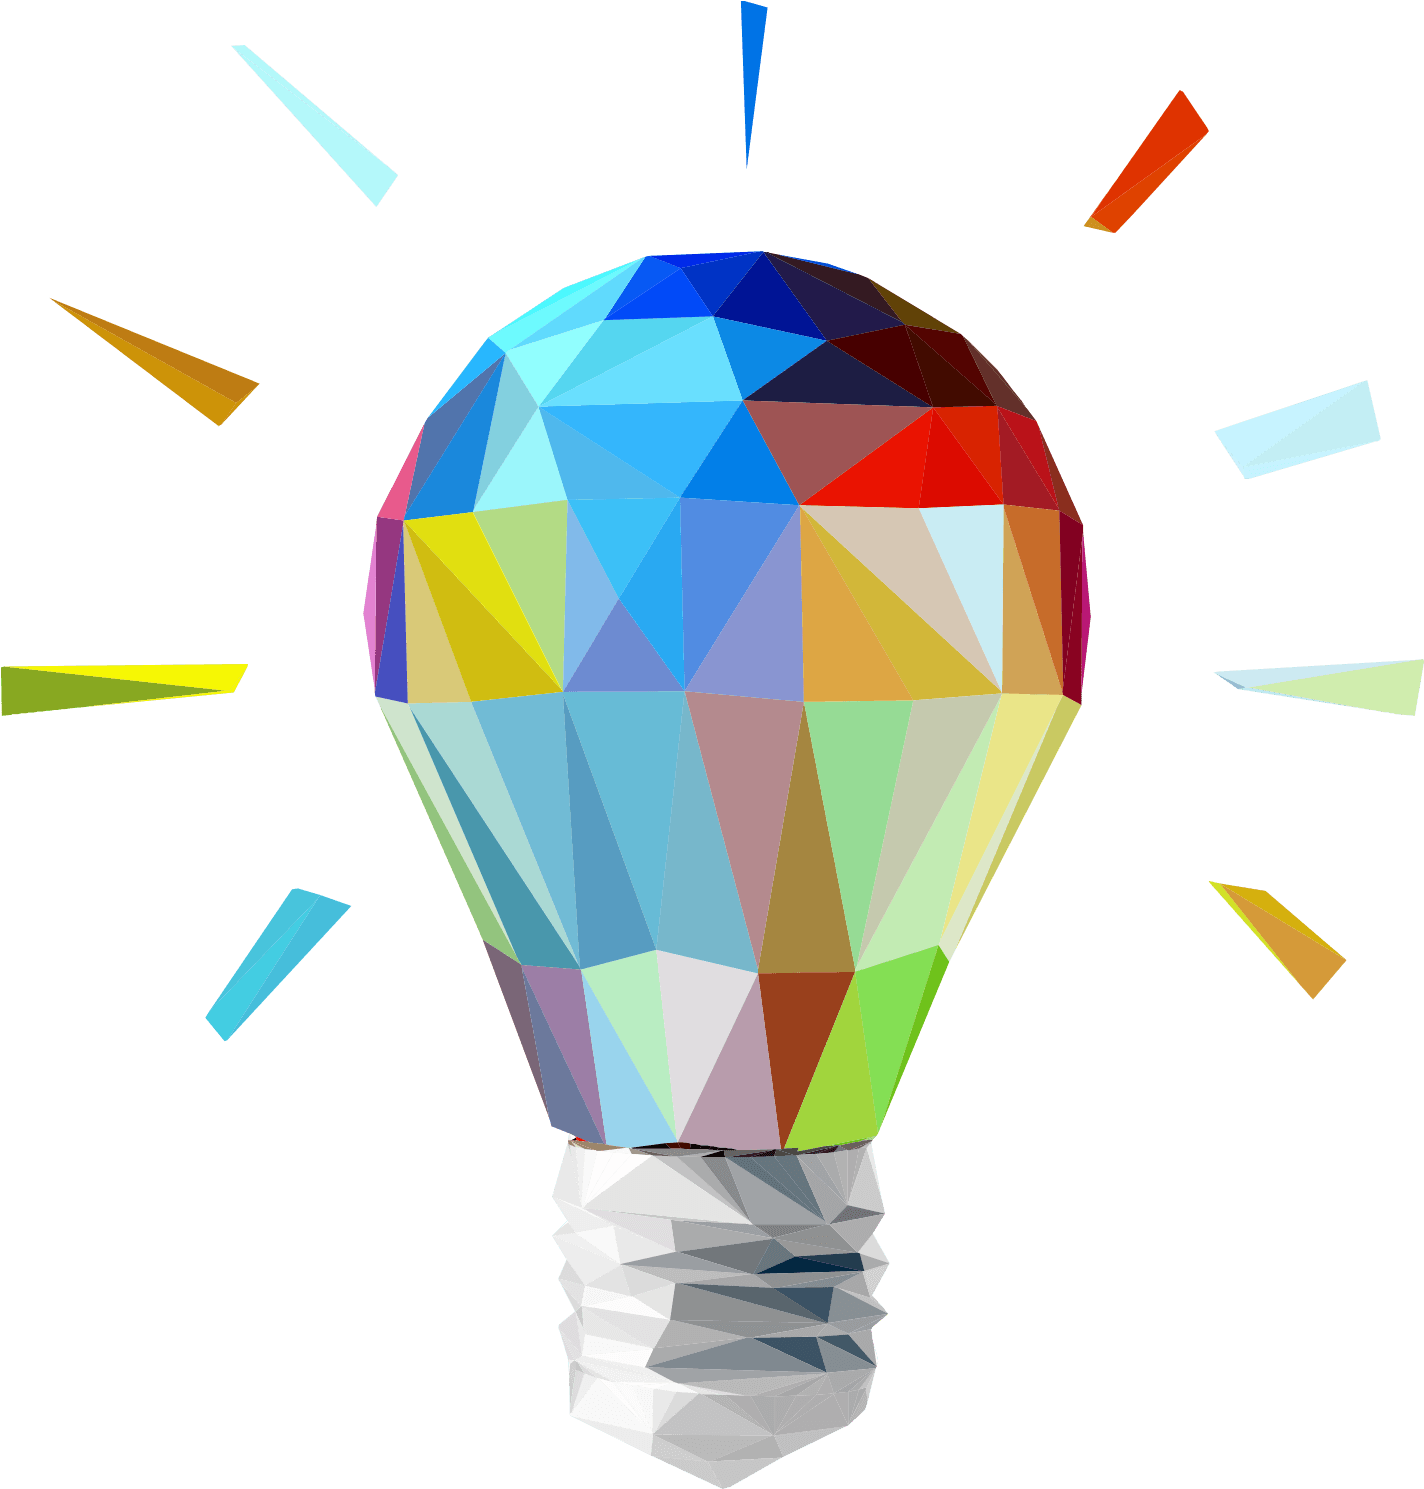 A Colorful Light Bulb With Many Triangles